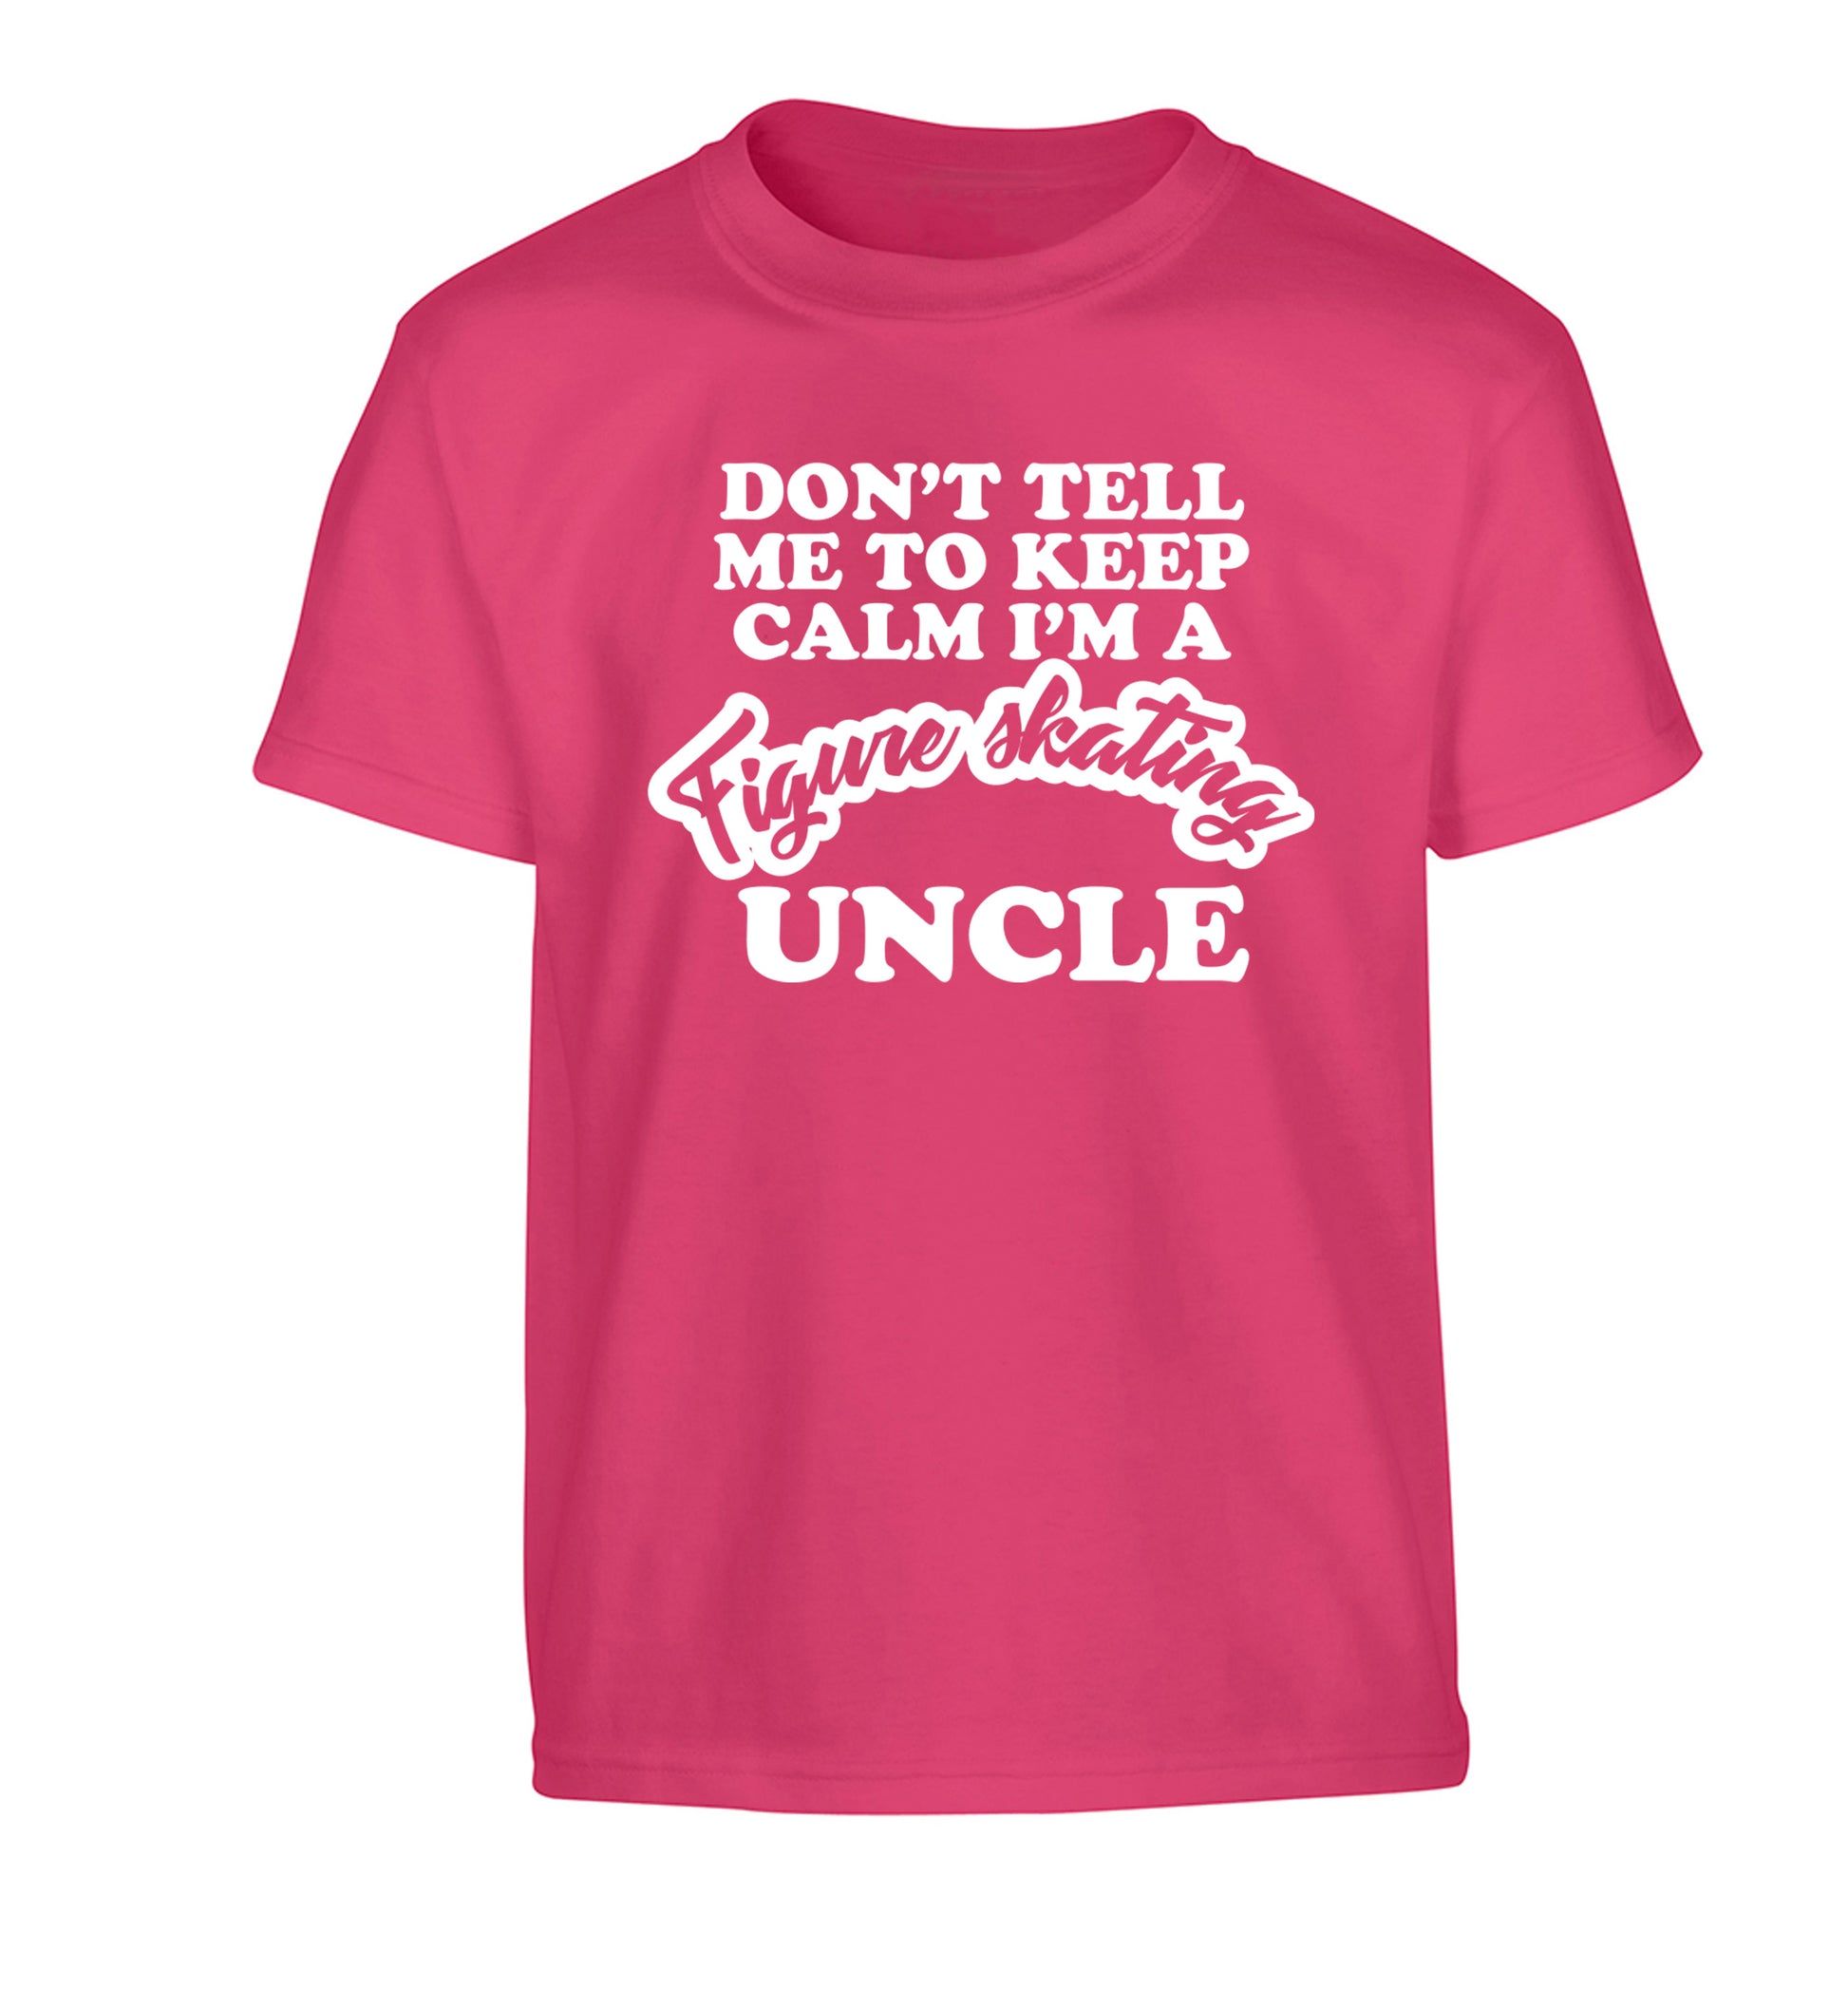 Don't tell me to keep calm I'm a figure skating uncle Children's pink Tshirt 12-14 Years